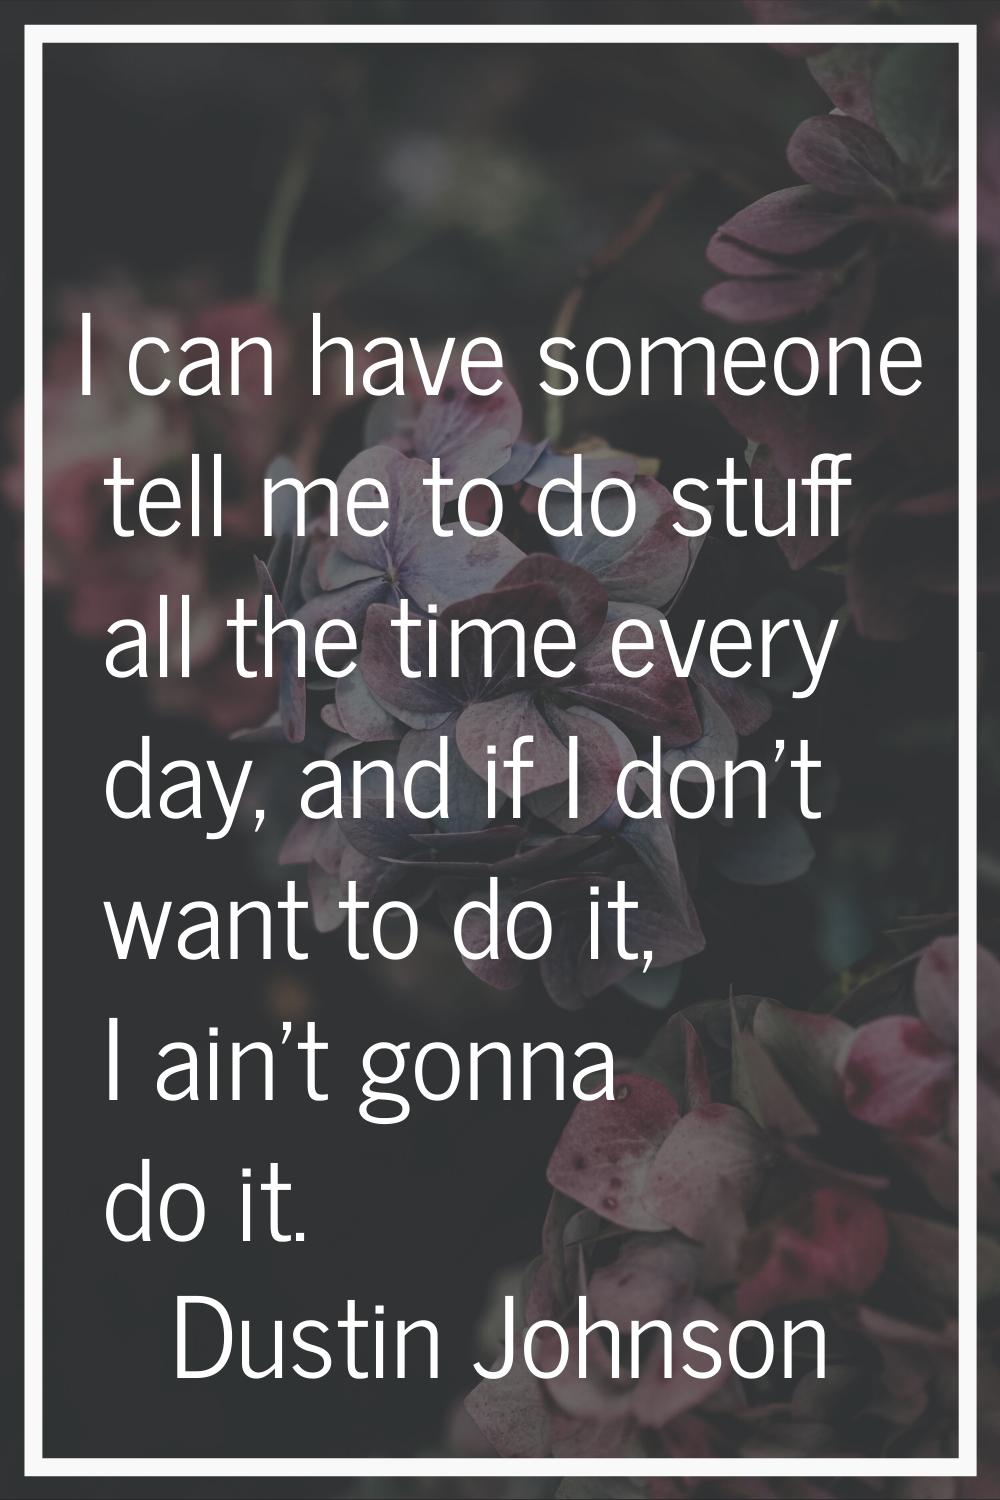 I can have someone tell me to do stuff all the time every day, and if I don't want to do it, I ain'